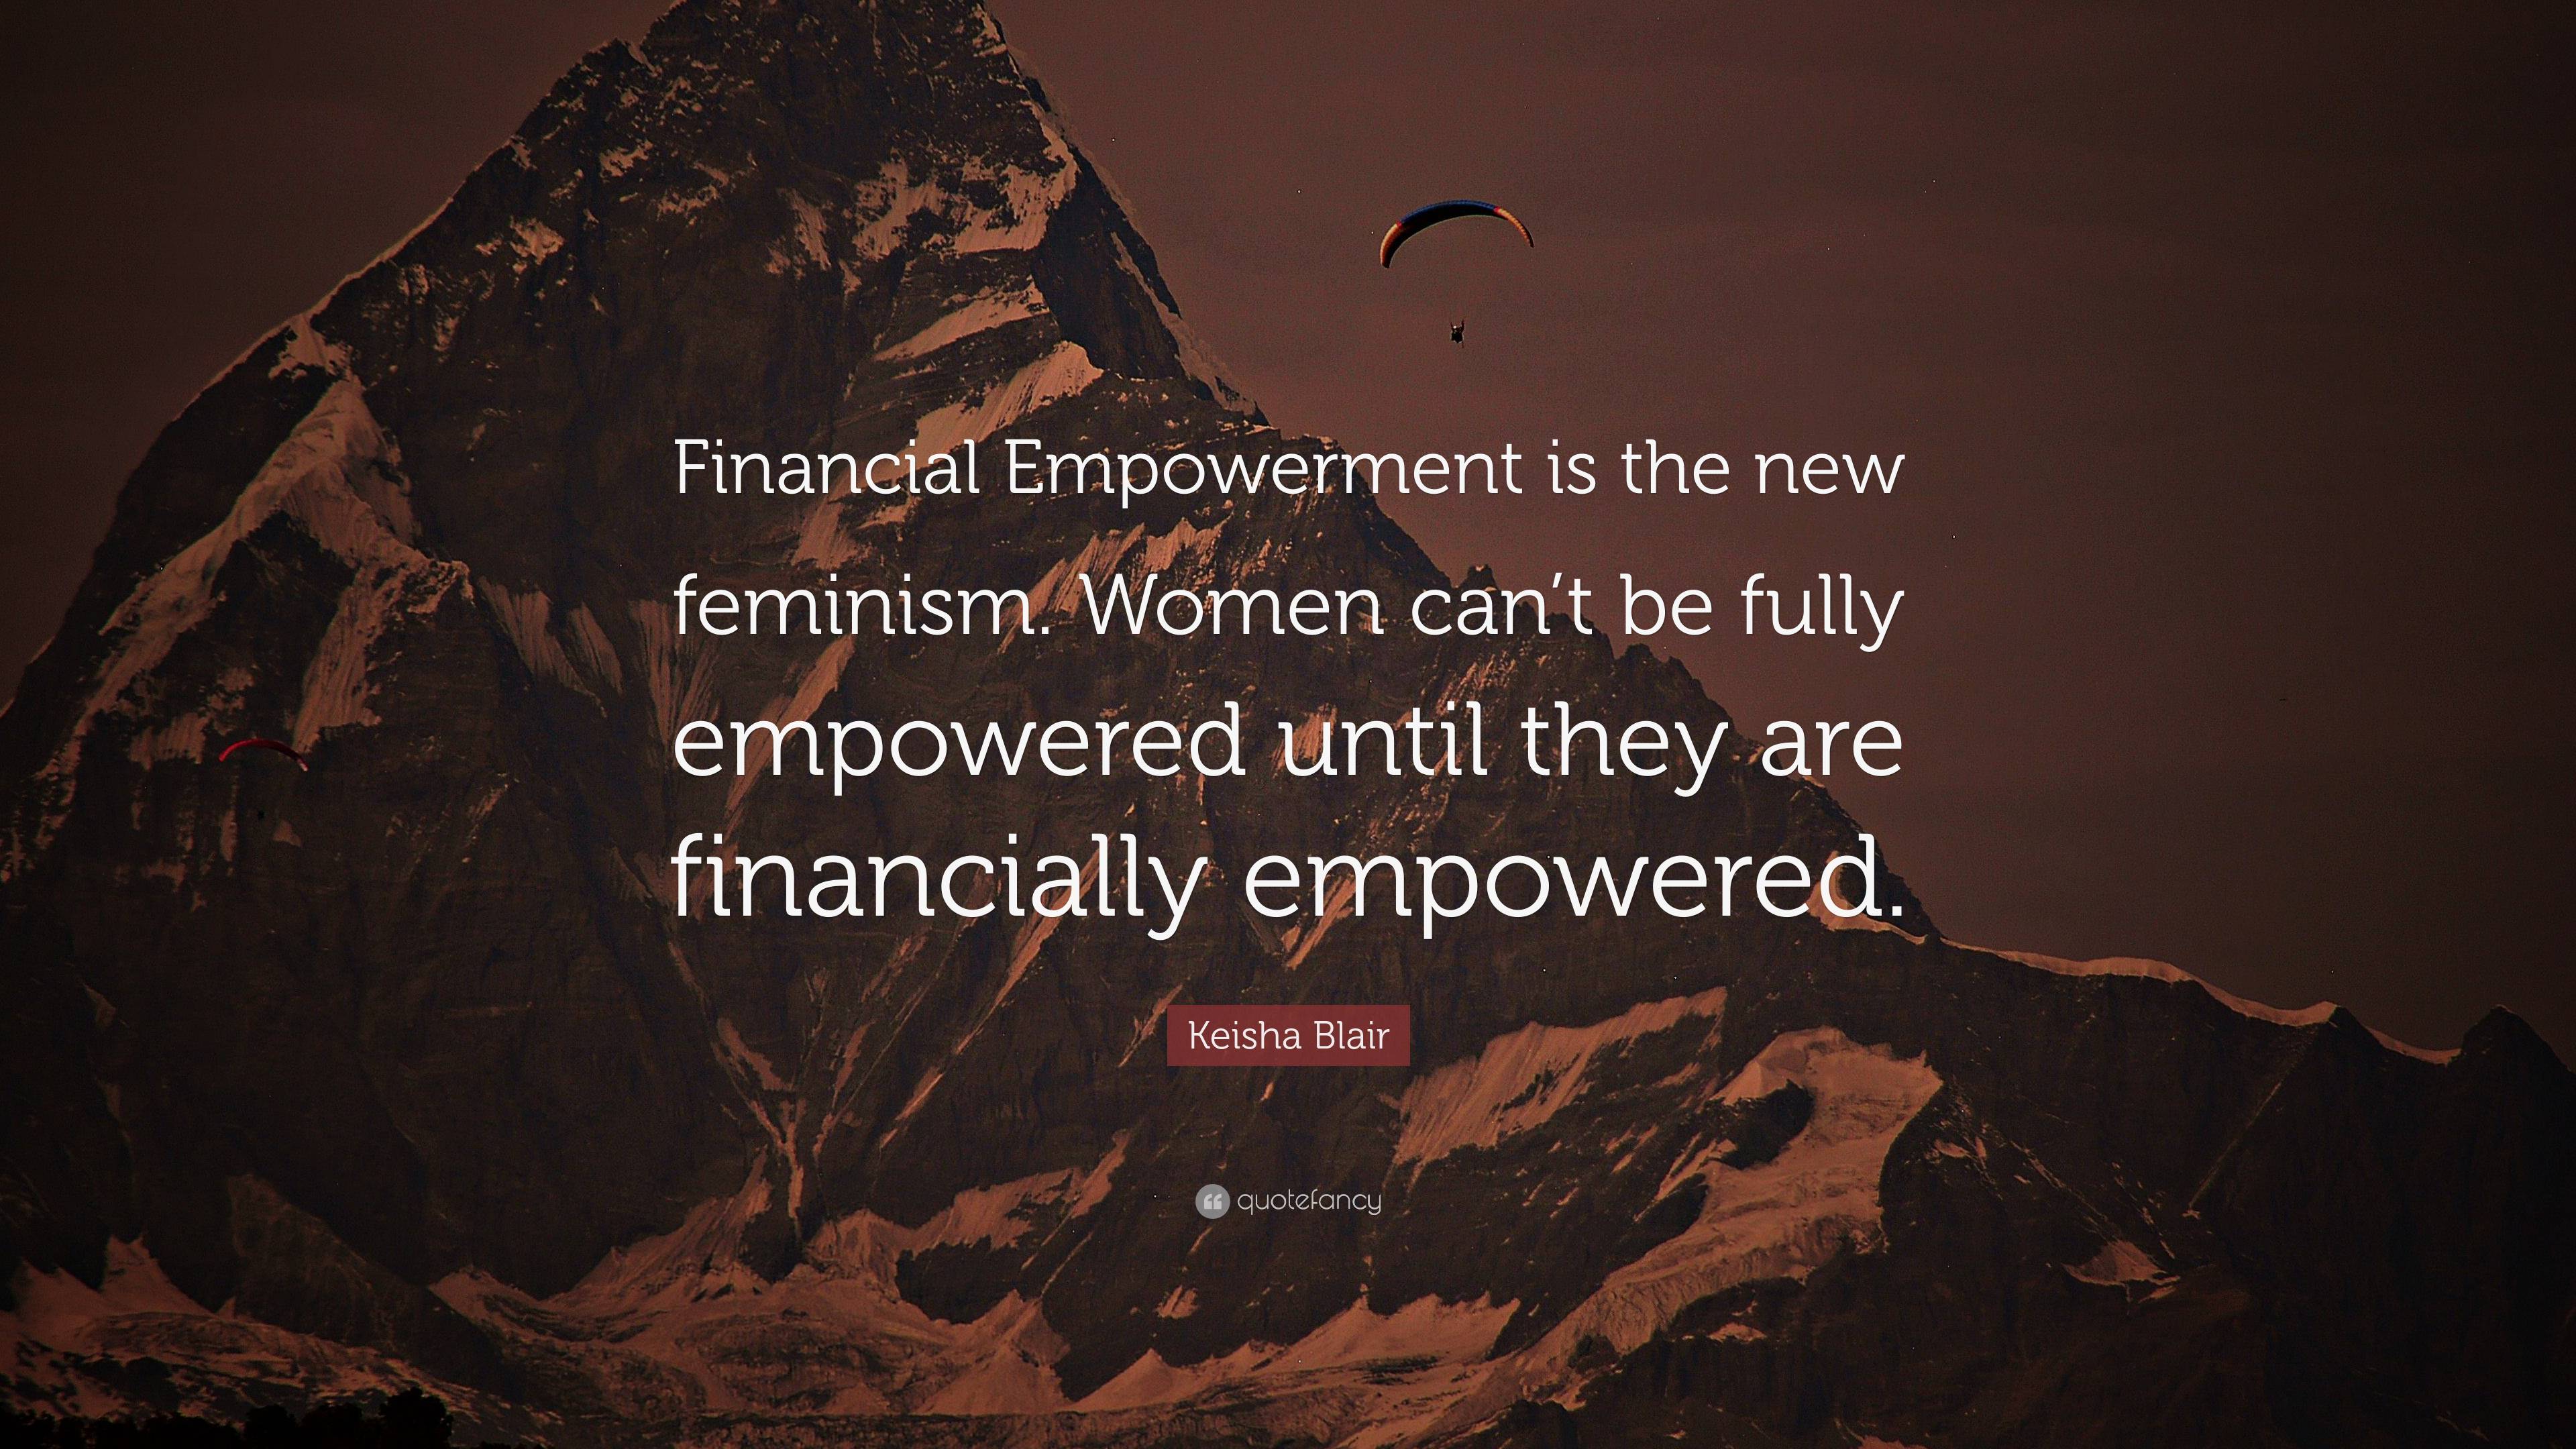 FULLY EMPOWERED